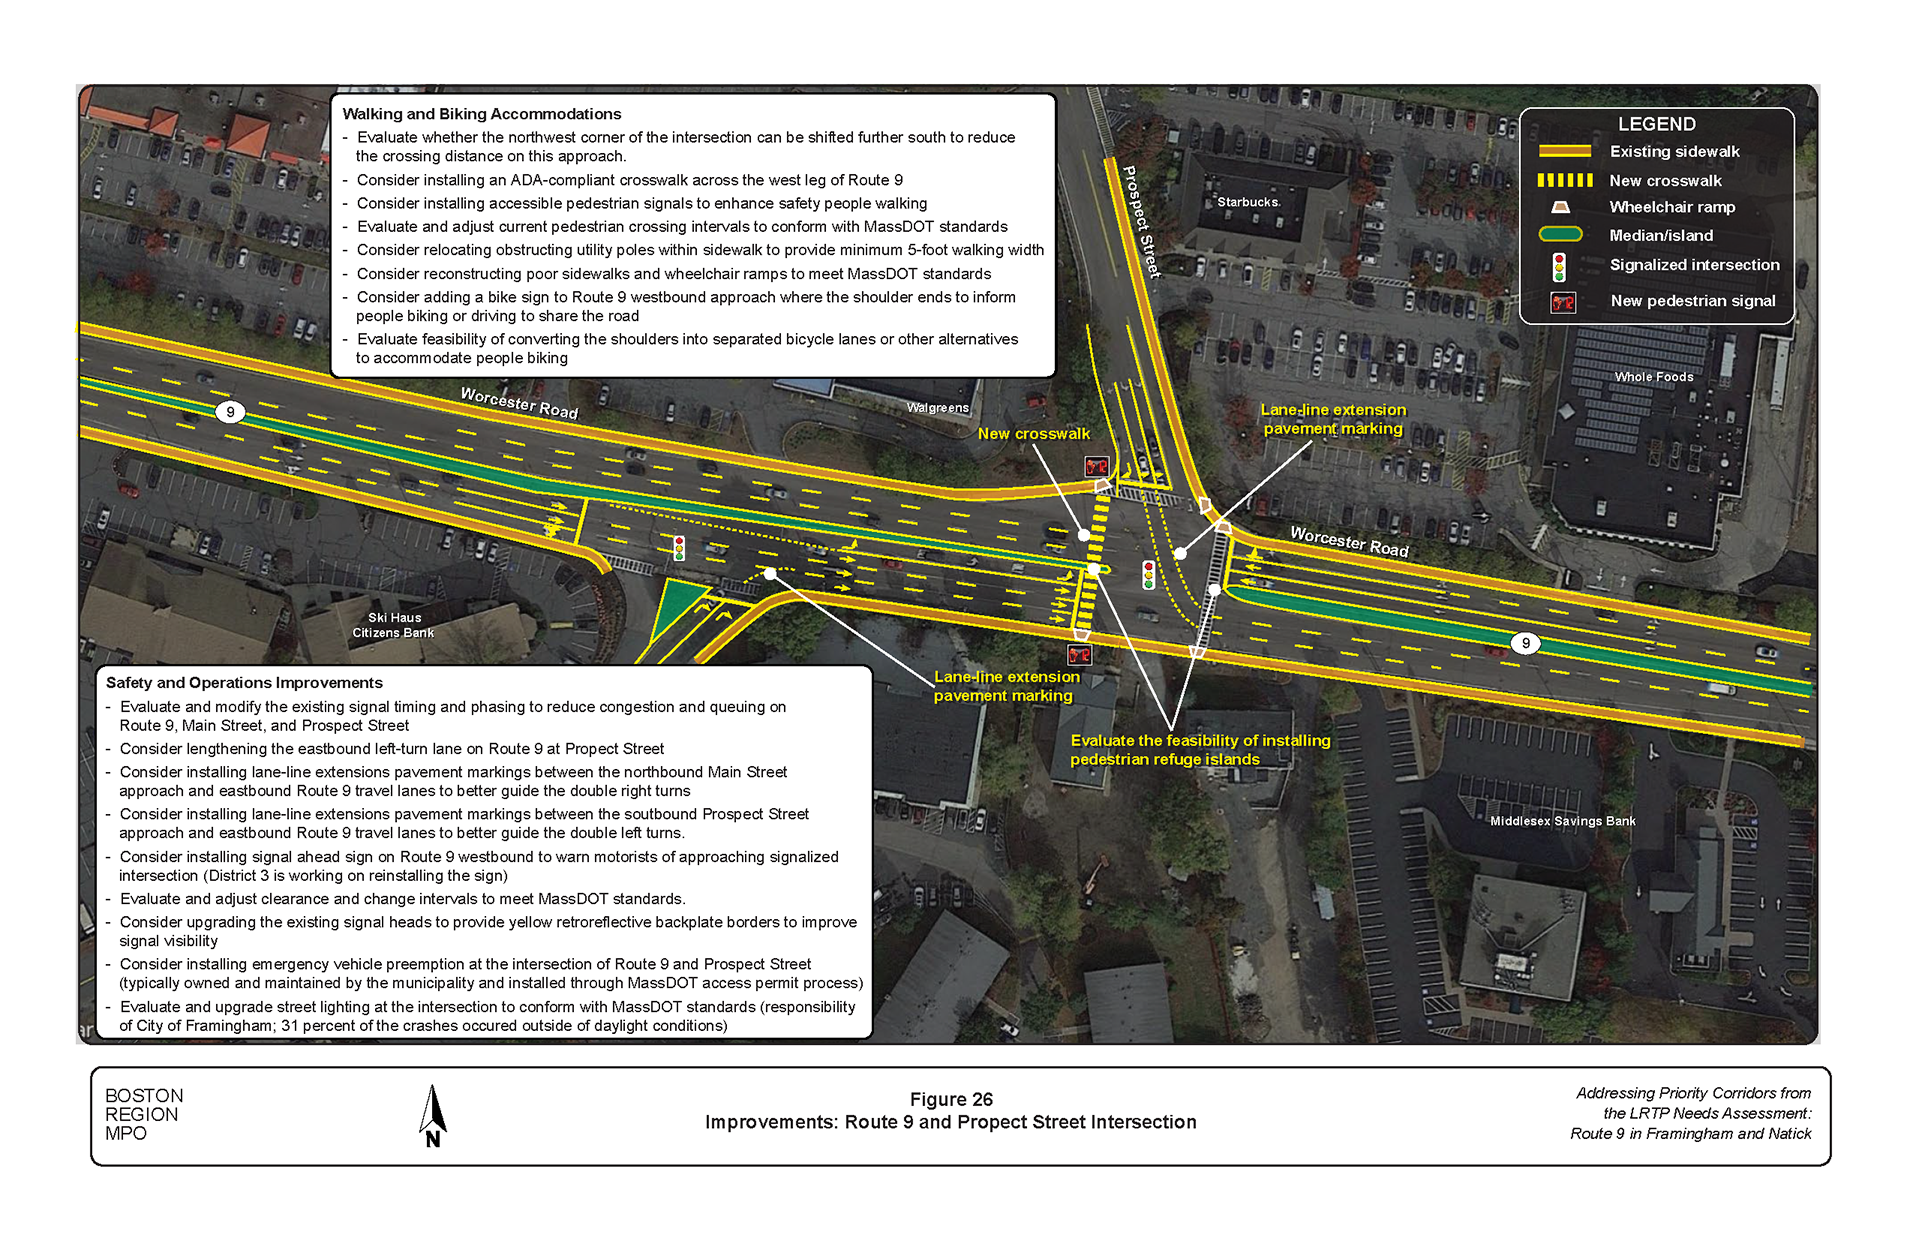 Figure 26 is an aerial photo showing the intersection of Route 9 and Prospect Street and the improvements